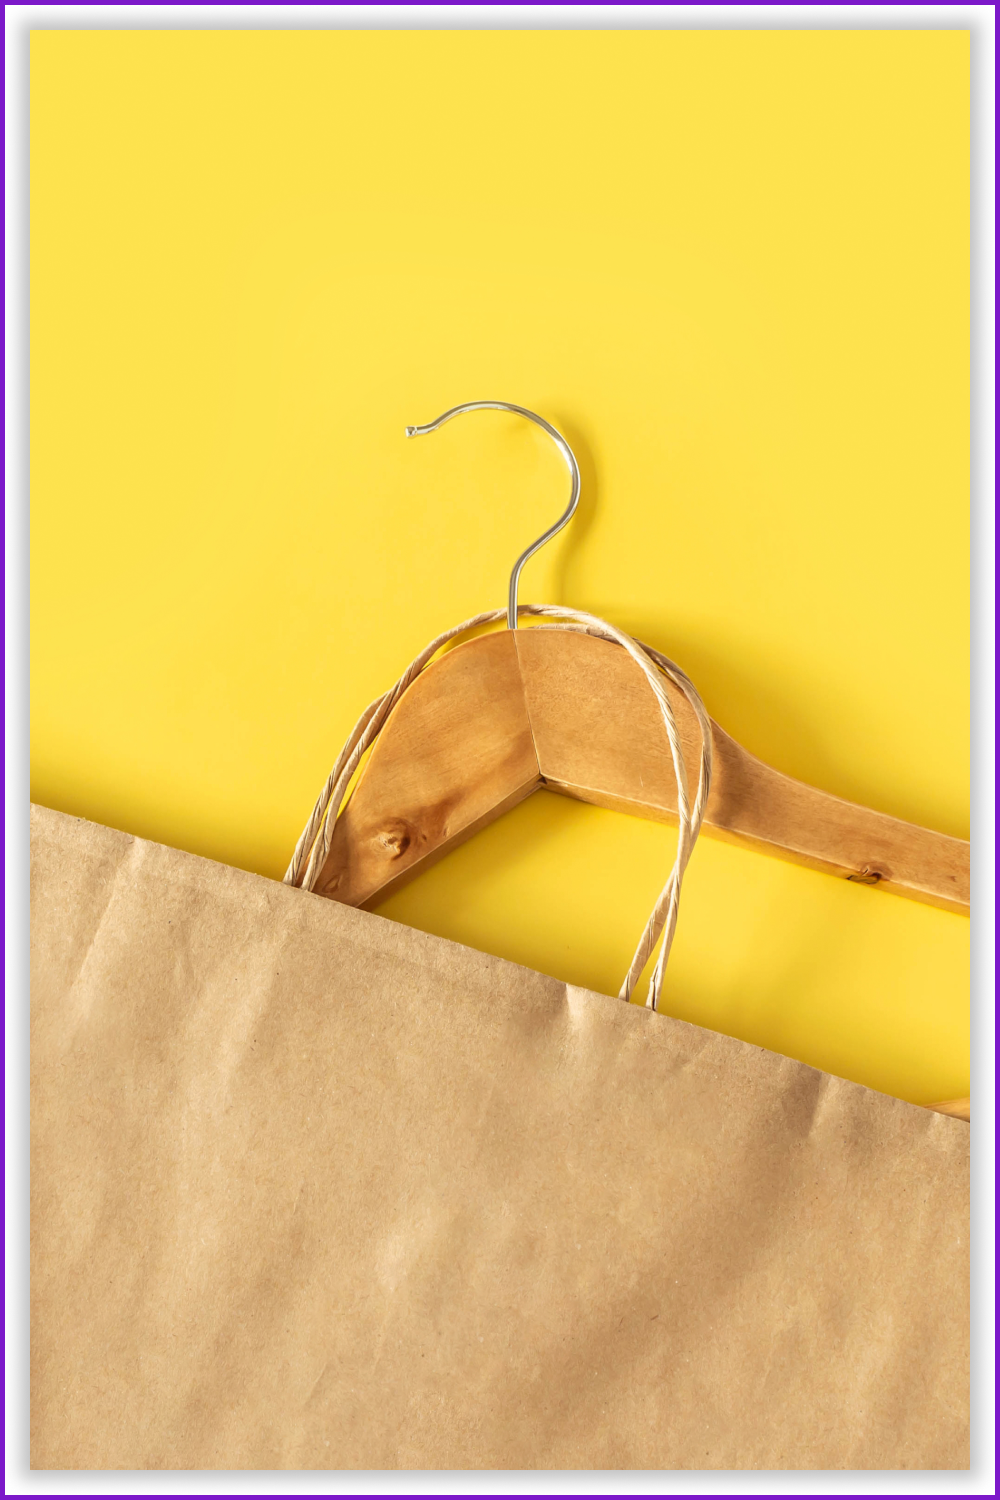 Hanger with a brown paper bag on the yellow background.